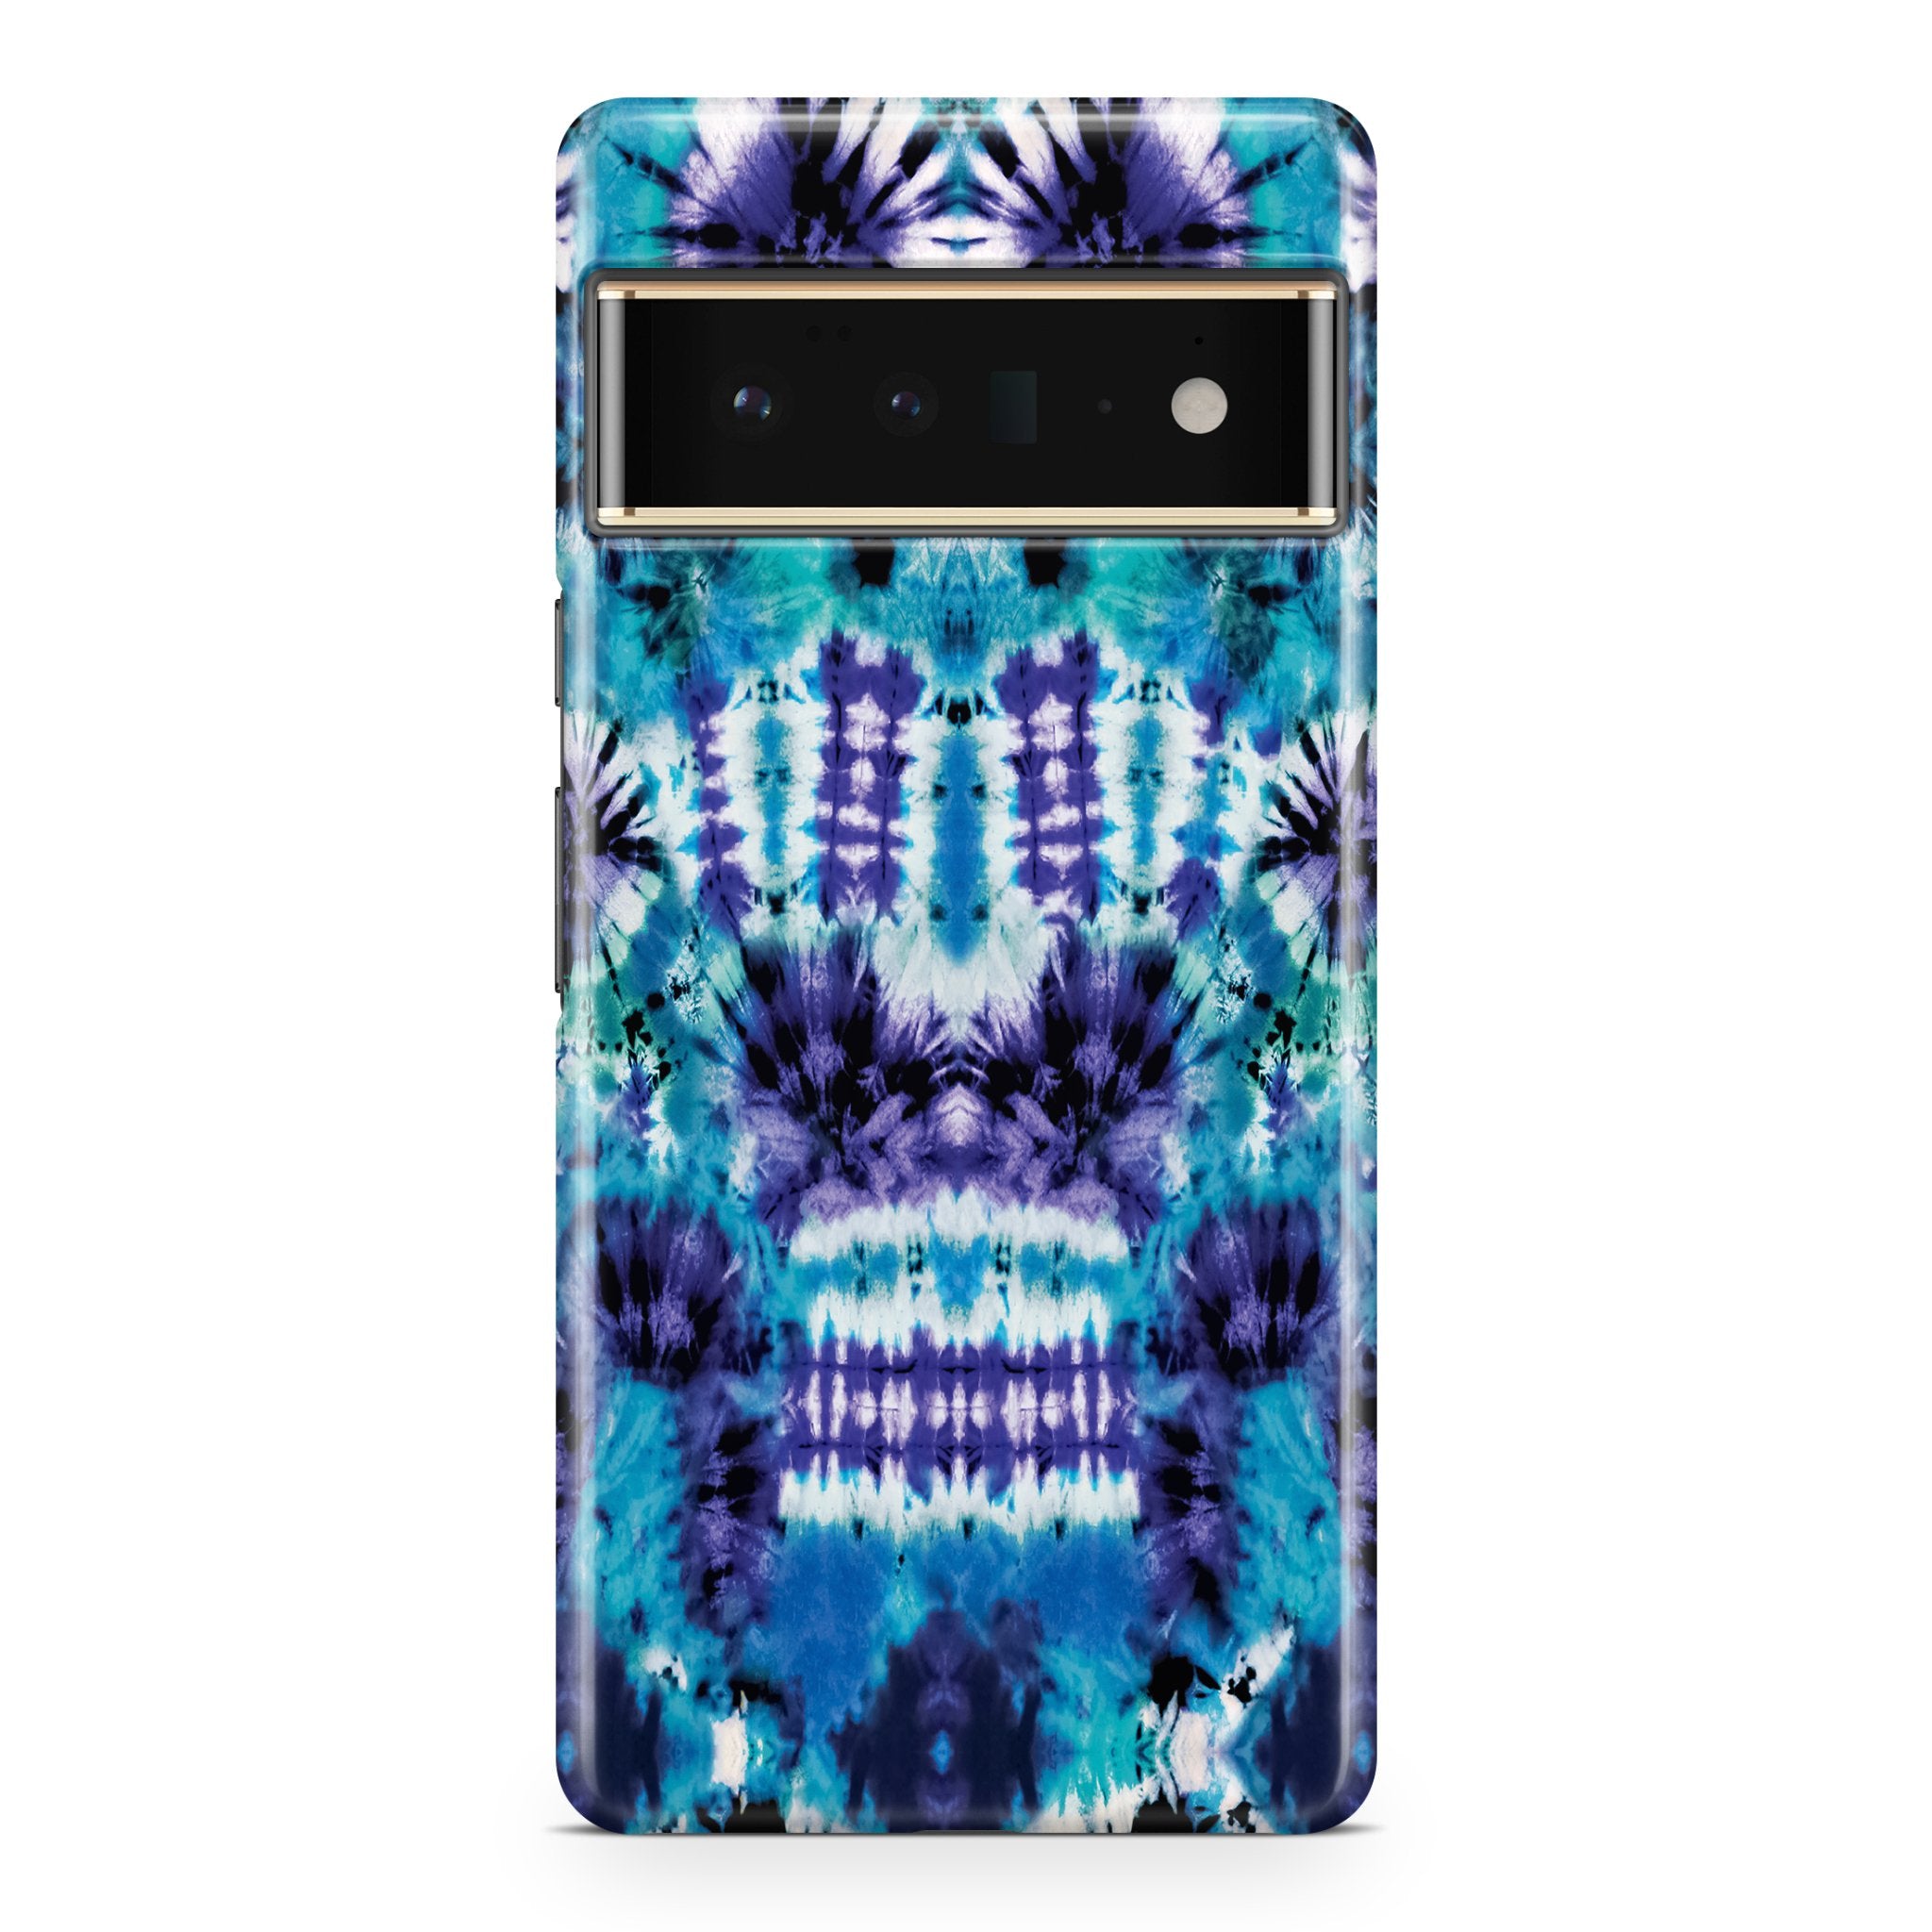 Blue Tie Dye - Google phone case designs by CaseSwagger